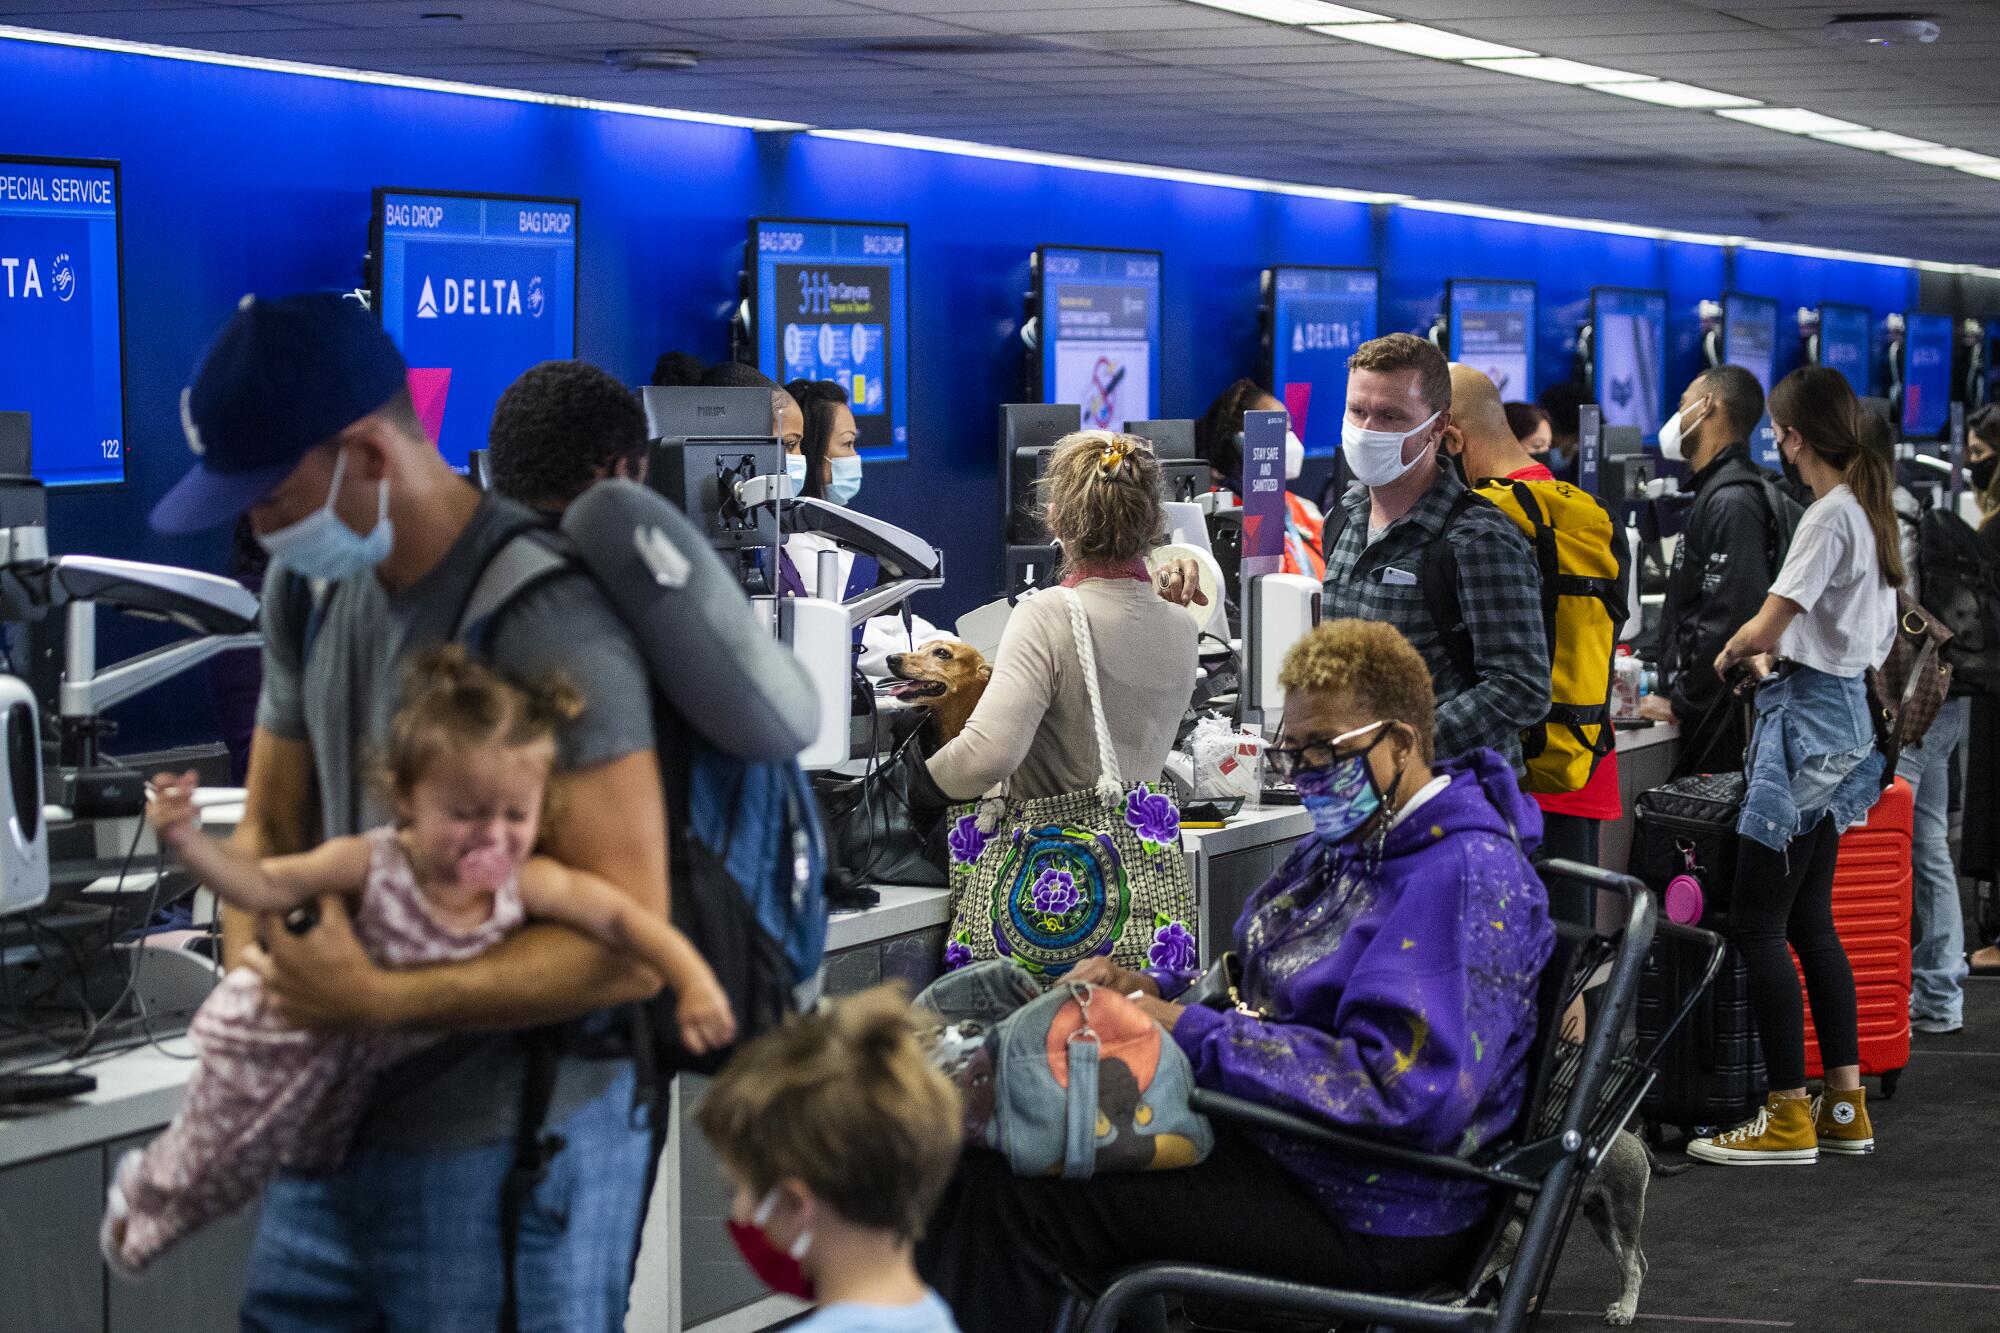 People wearing mask check in at a Delta counter at the airport